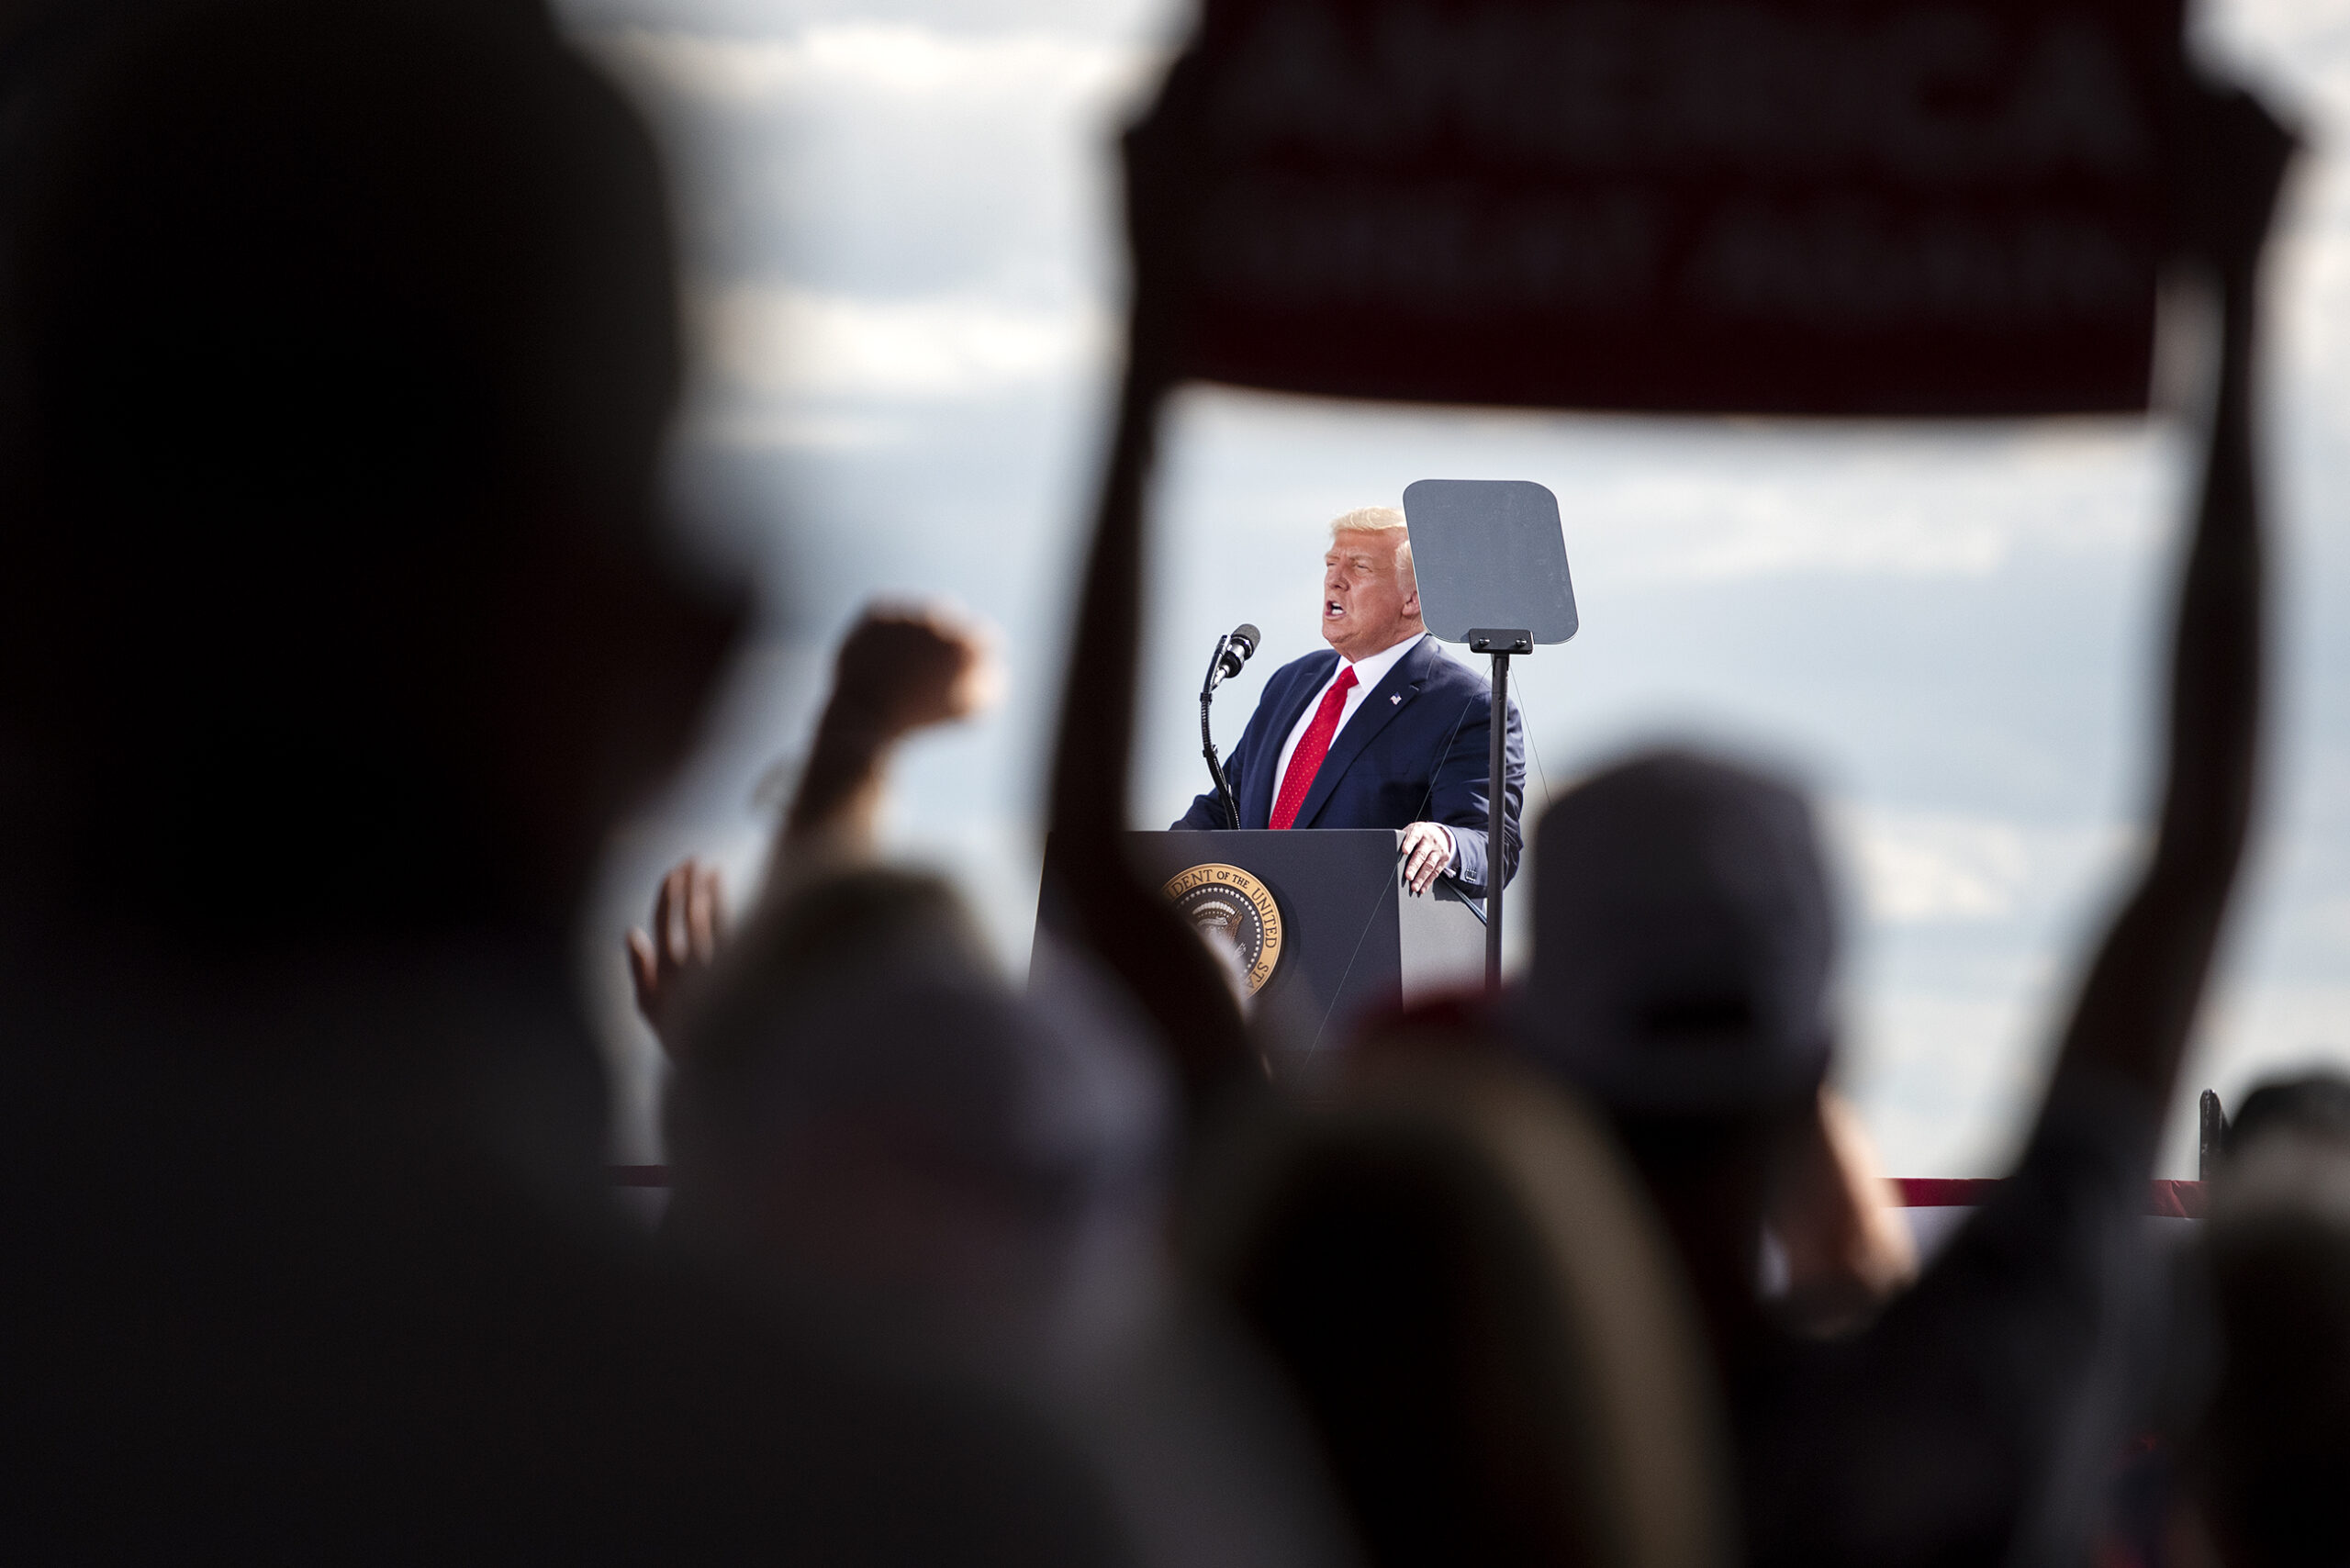 President Donald Trump can be seen through two arms holding up a sign in the crowd